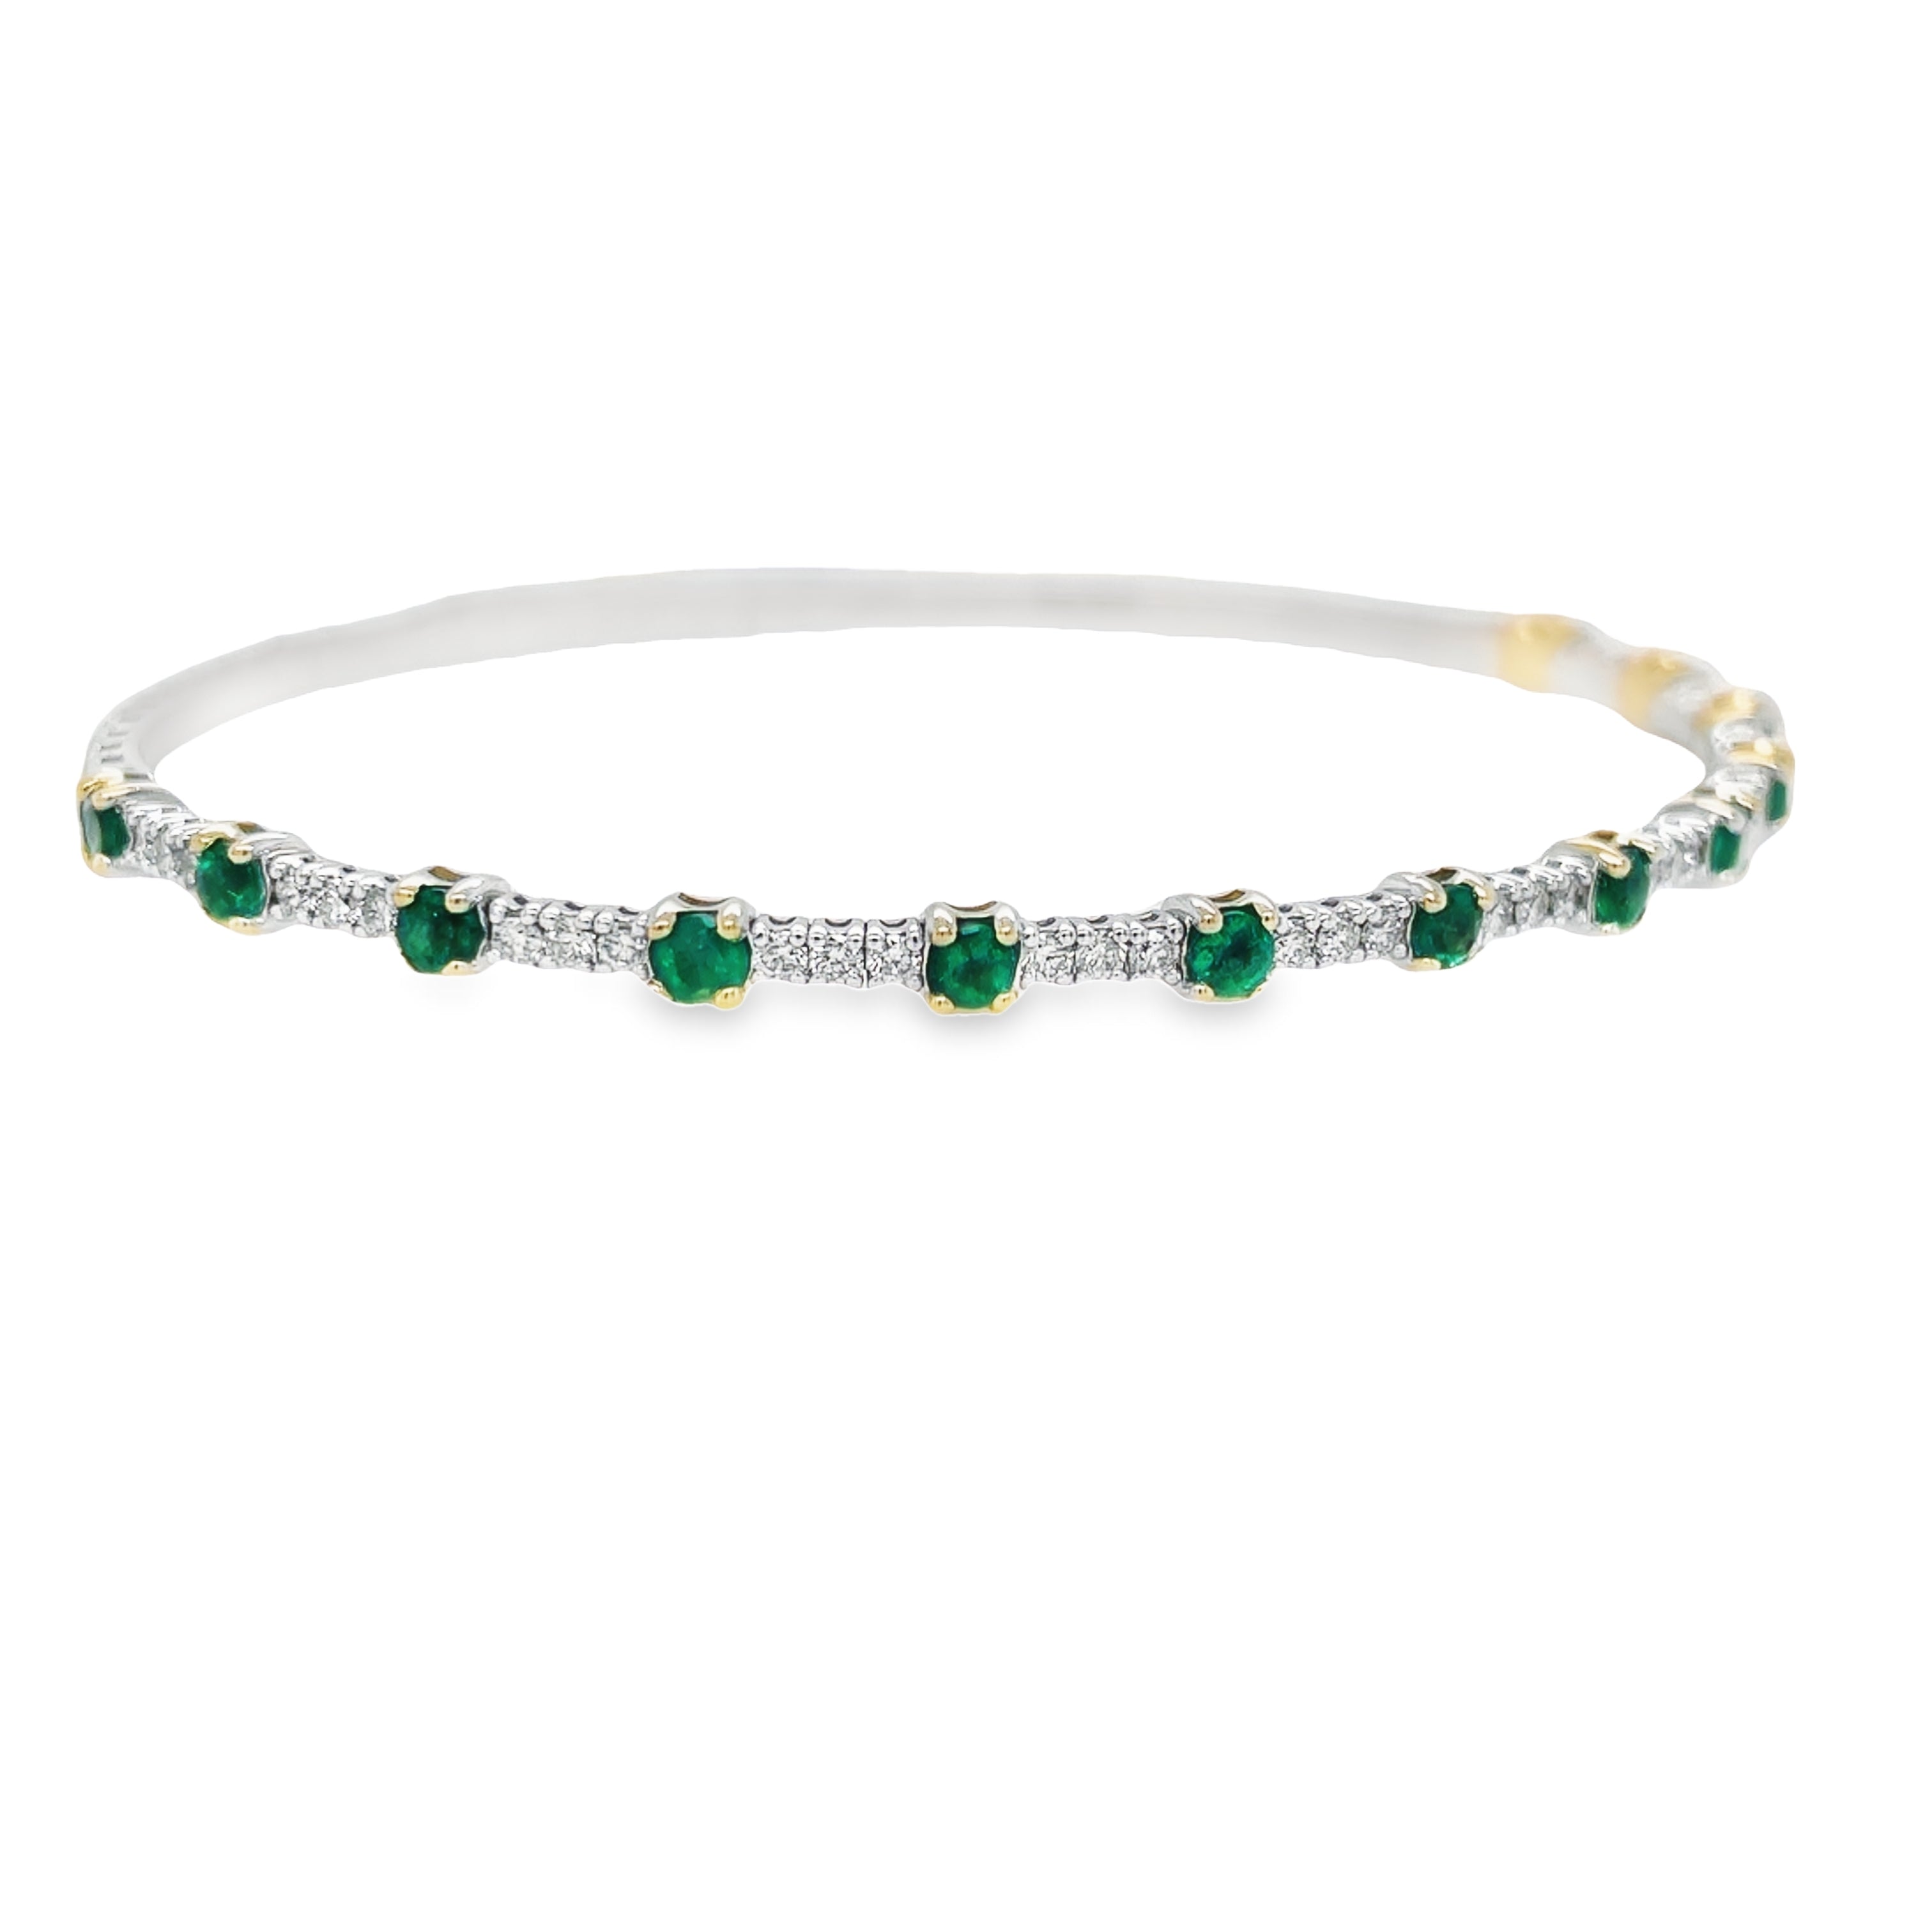 This luxurious dainty bangle bracelet crafted in 18K white gold is set with 0.57 carats of round diamonds and round emeralds 0.91 cts. It is the perfect accessory to add a subtle sparkle to any ensemble or stack multiple for a bolder look.  Hinge system